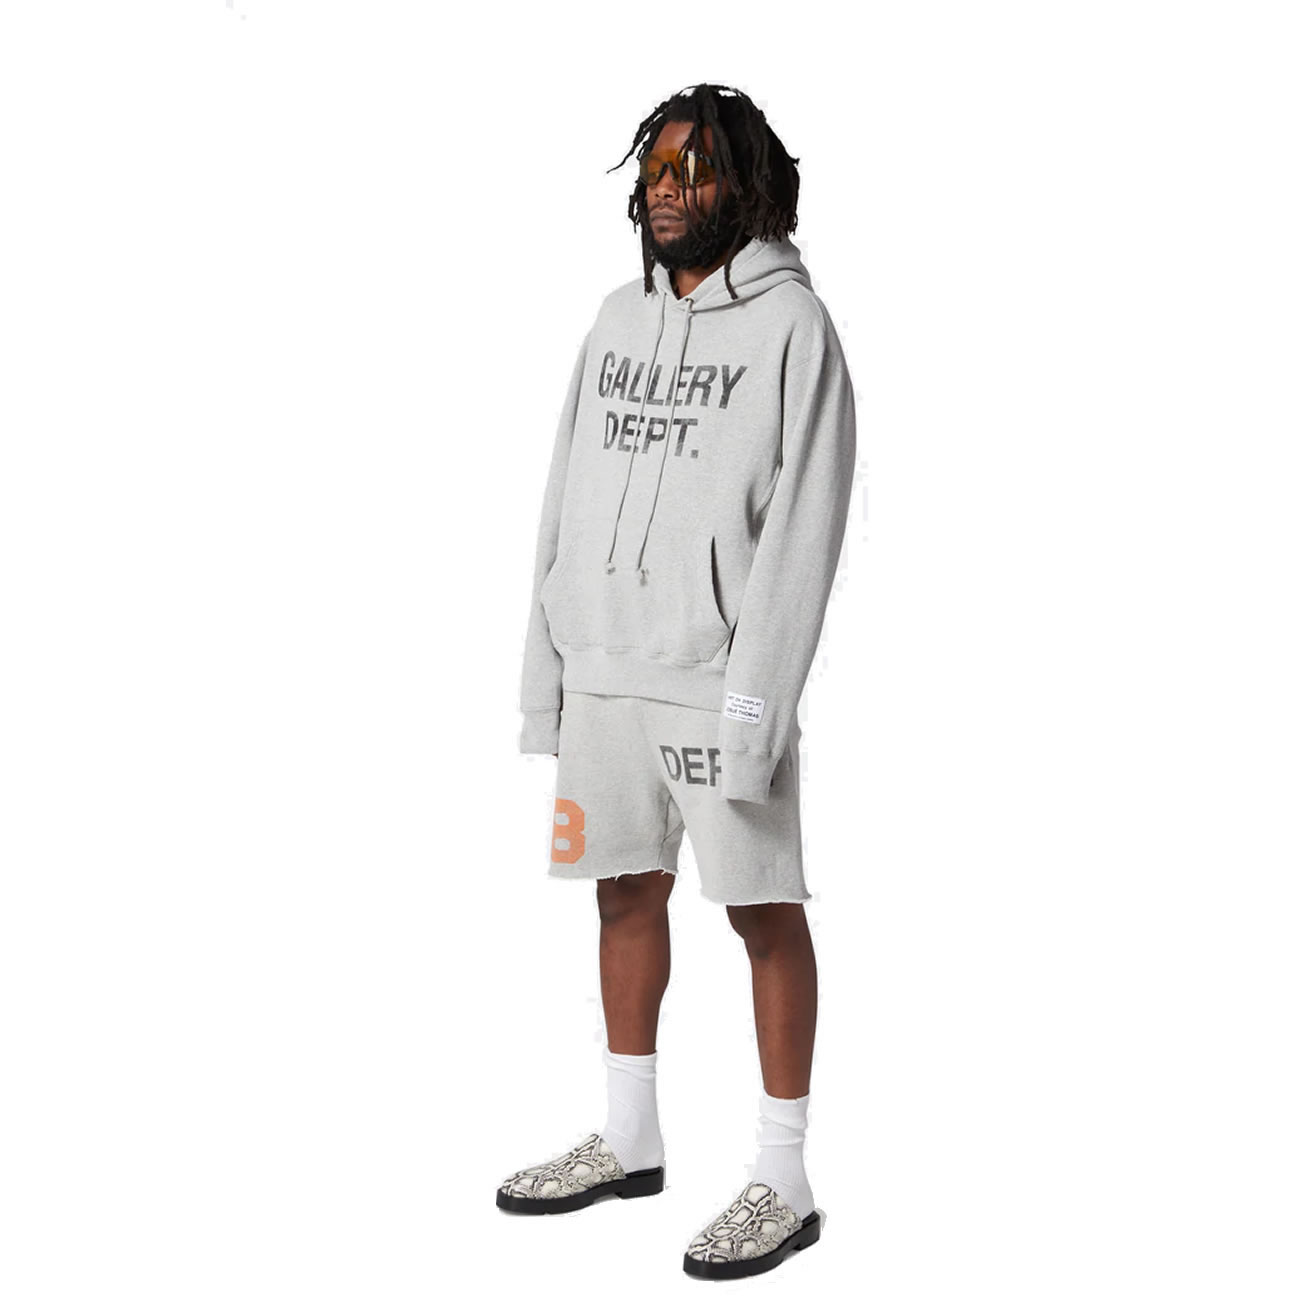 GALLERY DEPT Logo Sweat Shorts trousers